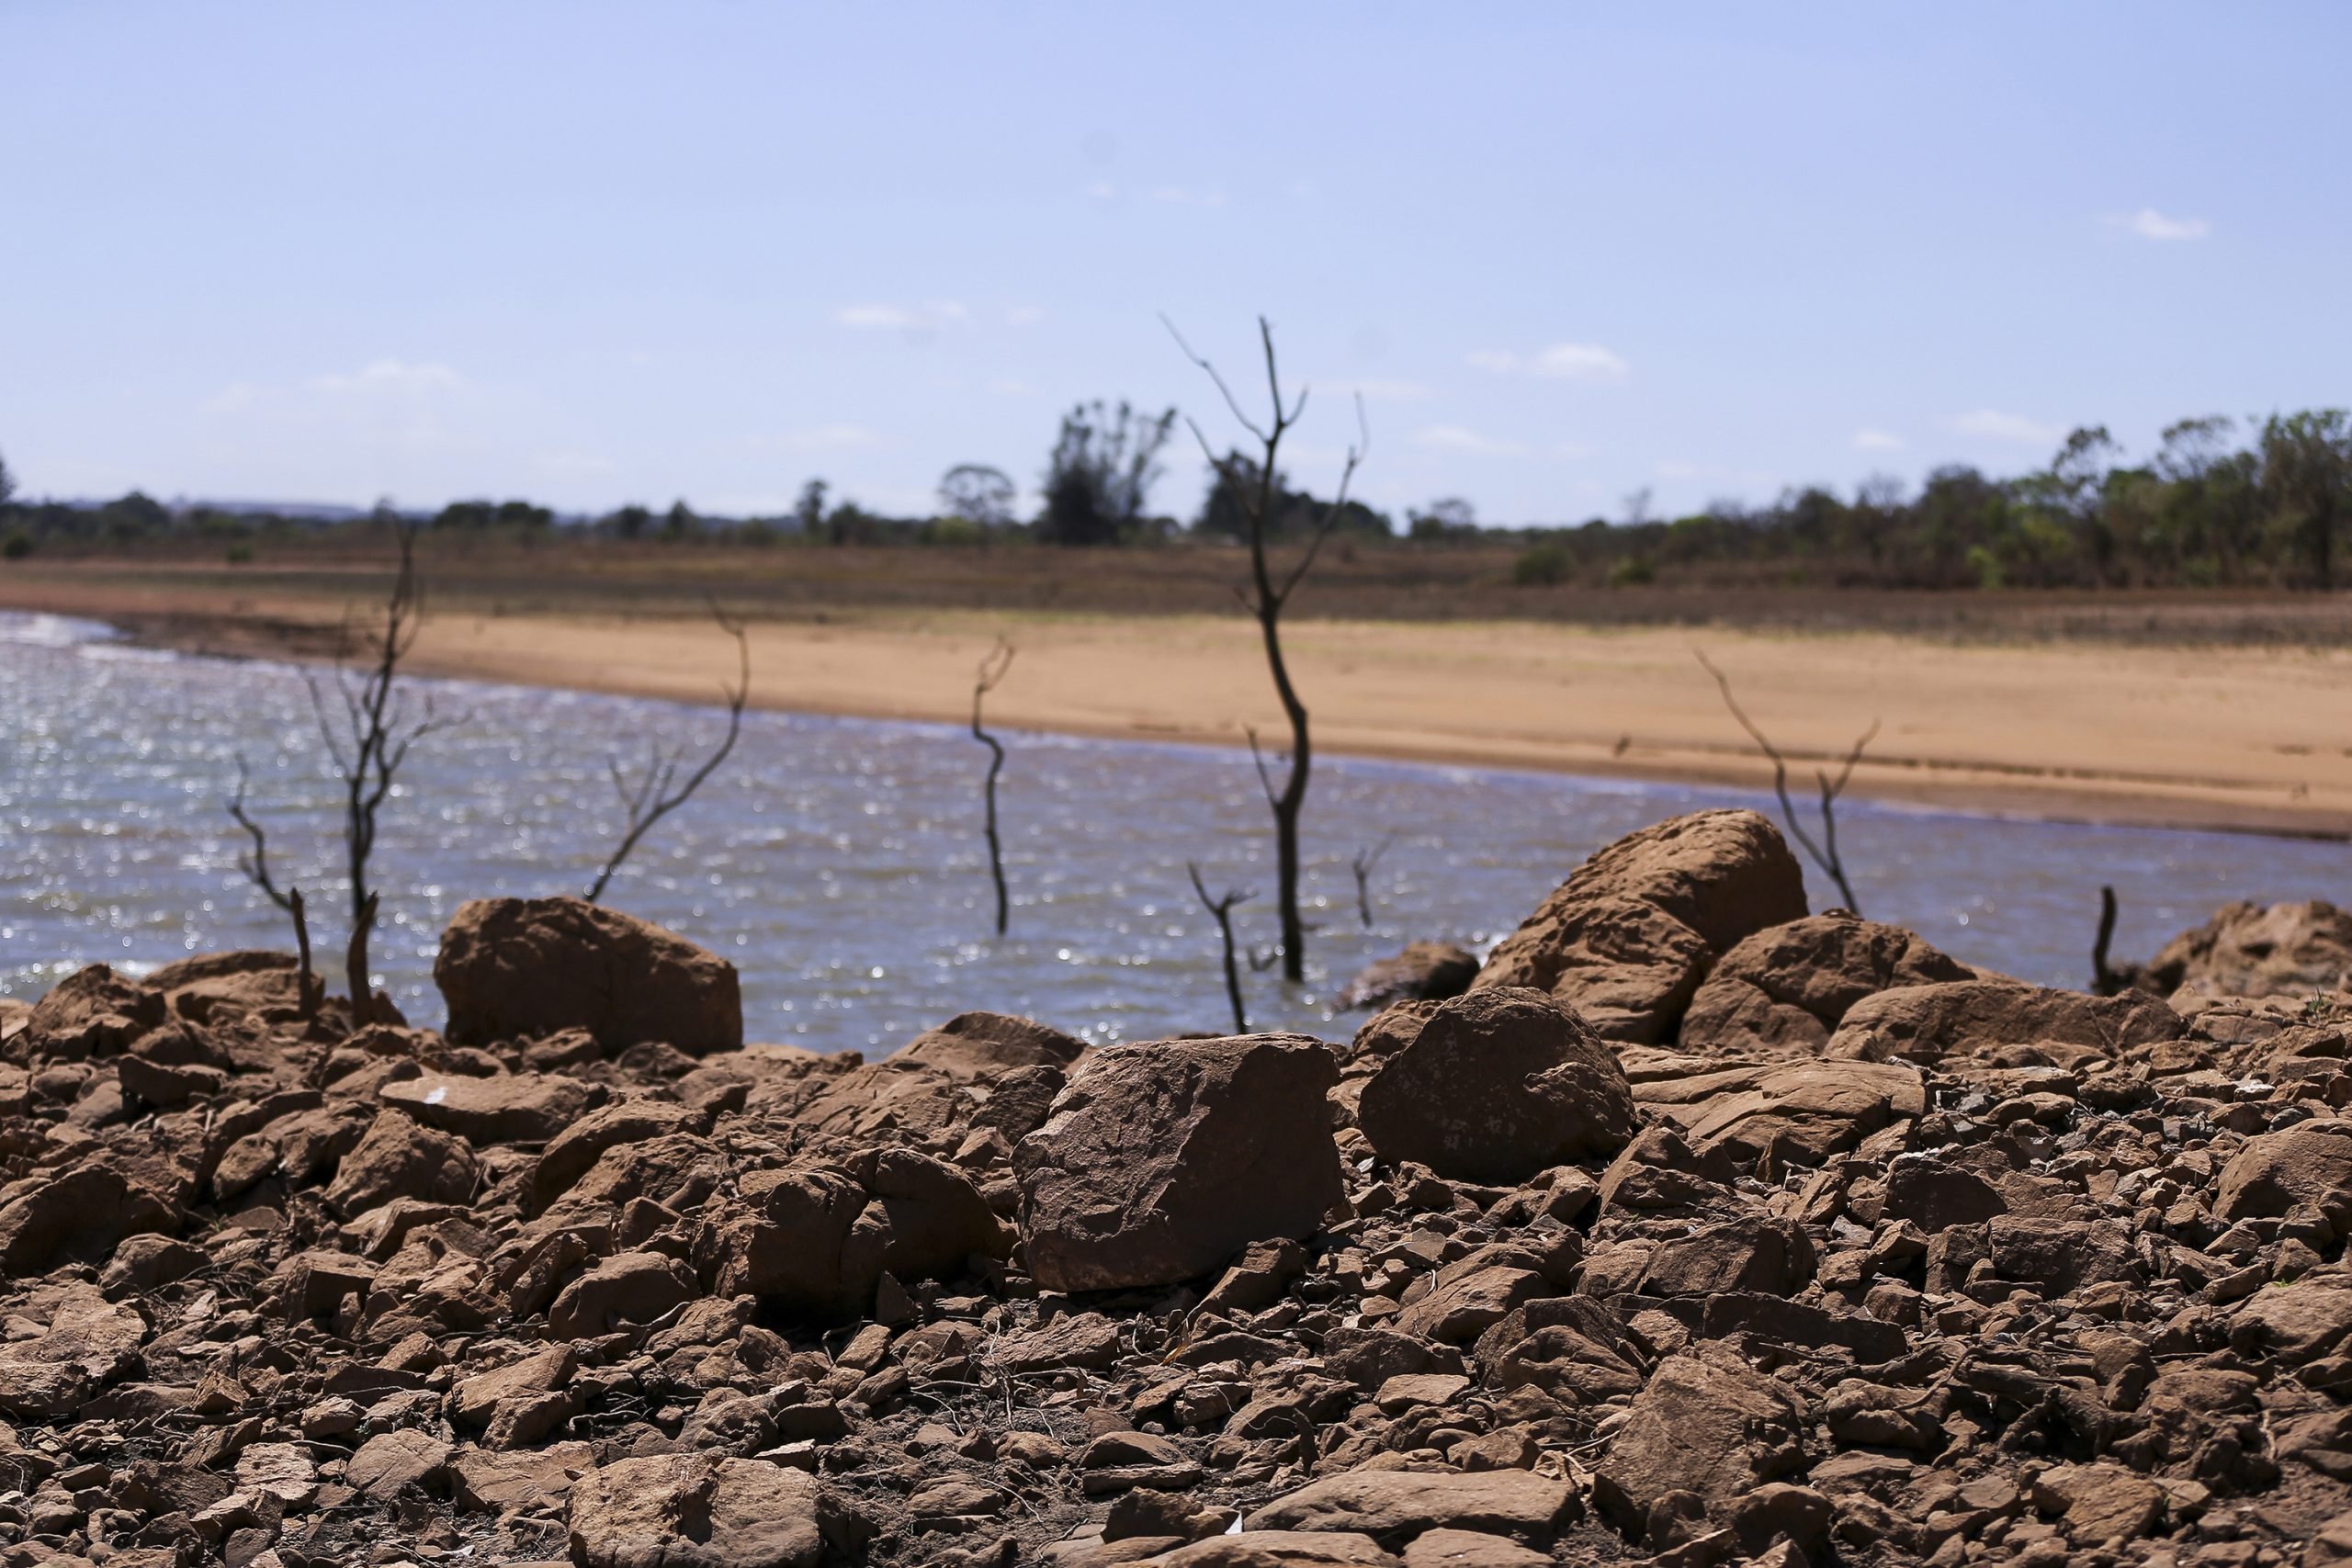 Dried stems of plants next to the Descoberto River during a drought in Brazil